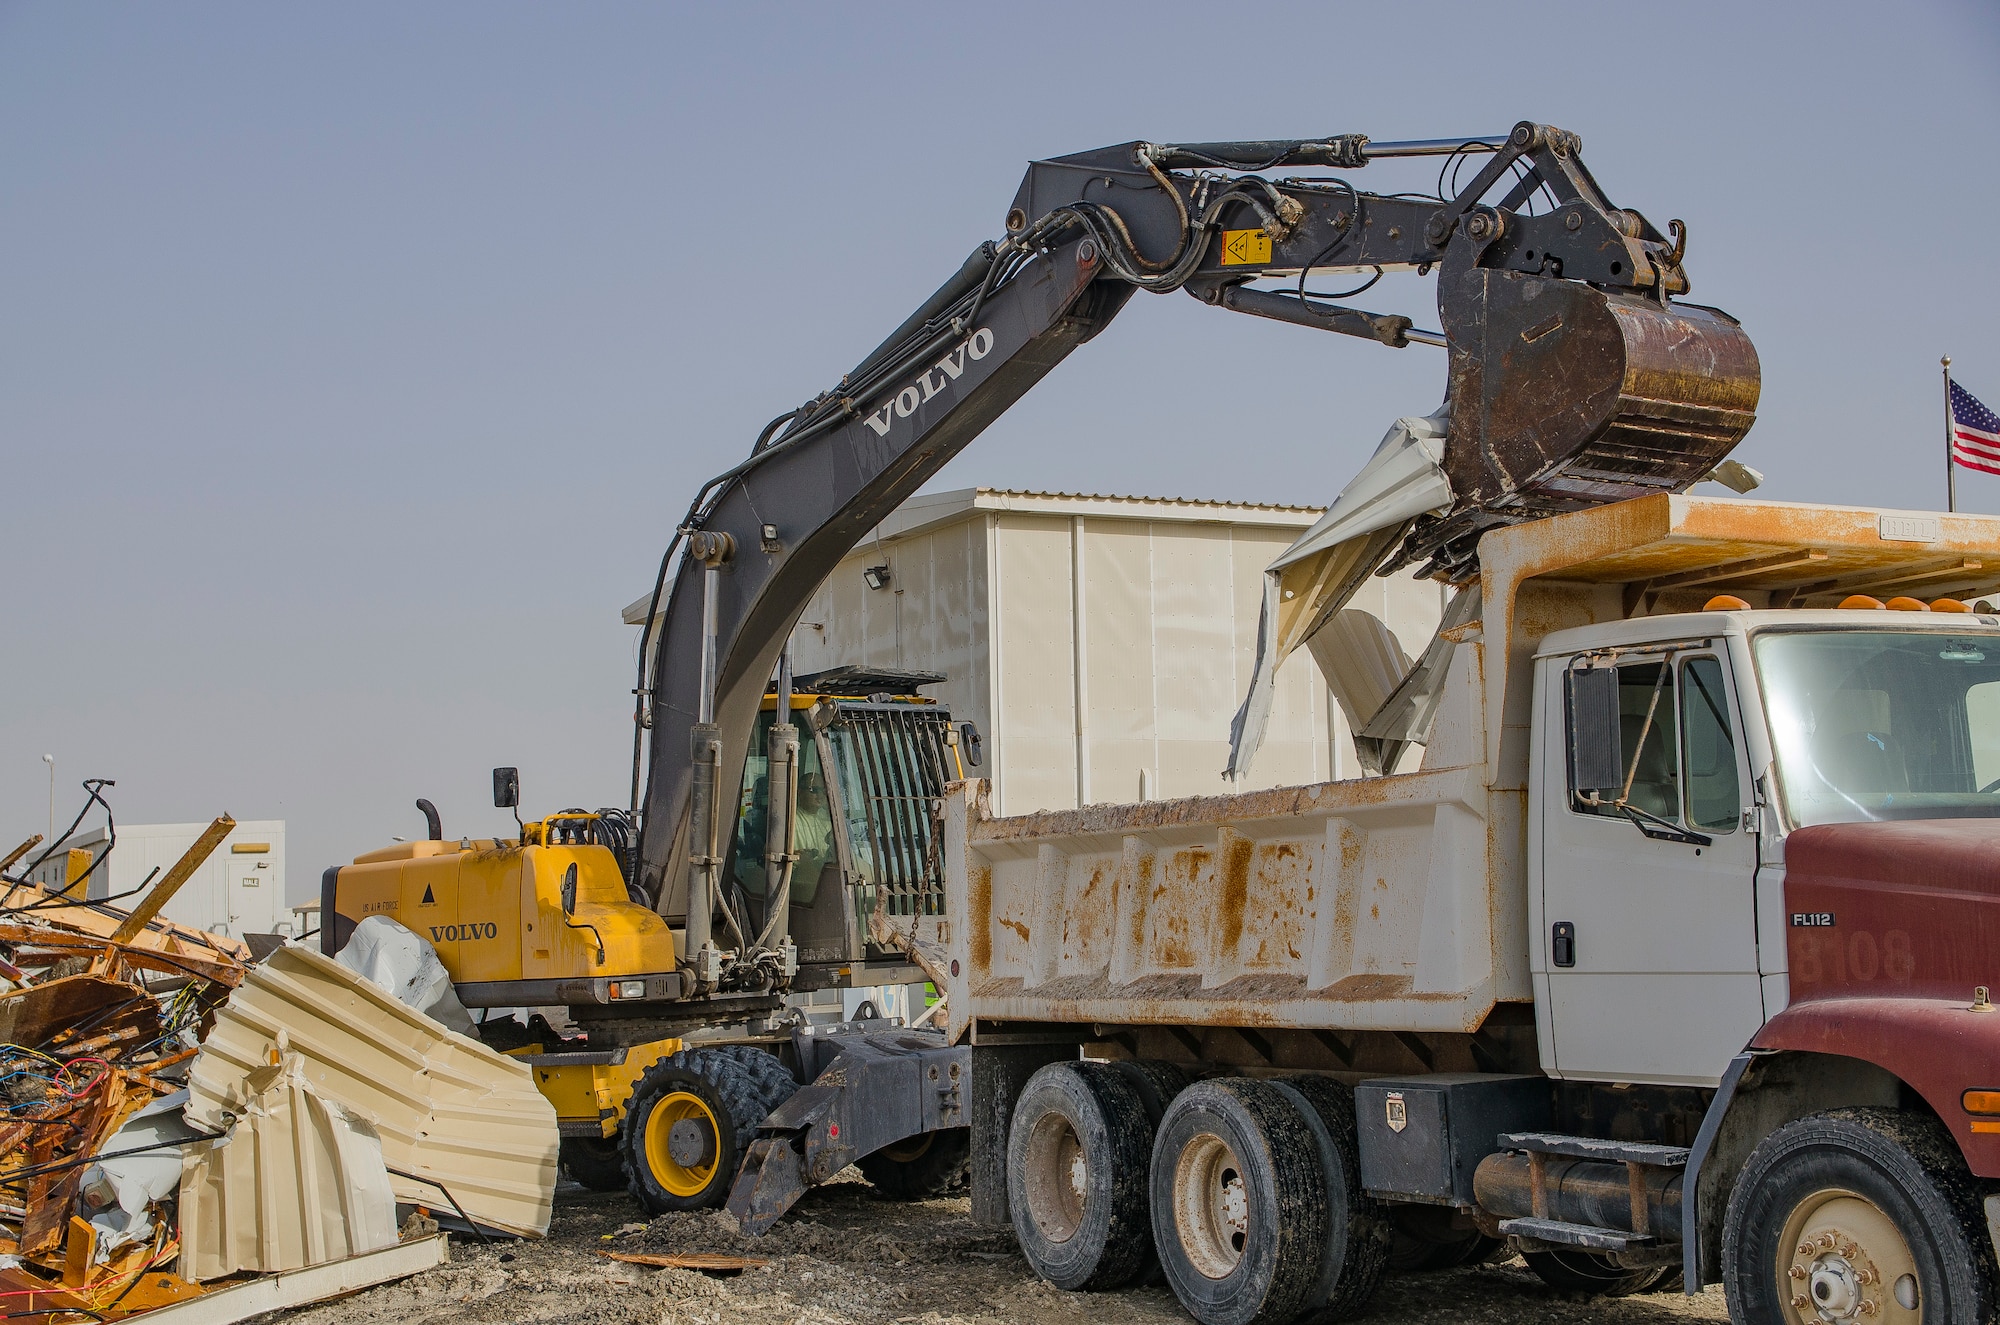 Staff Sgt. Nicholas Warkocz, pavements and heavy equipment operator, uses an excavator to remove debris from a demolished building May 9, 2018, at Al Dhafra Air Base, United Arab Emirates. Heavy equipment operators are capable of constructing, maintaining and inspecting concrete and asphalt runways, aircraft parking aprons and roads. (U.S. Air National Guard photo by Staff Sgt. Ross A. Whitley)